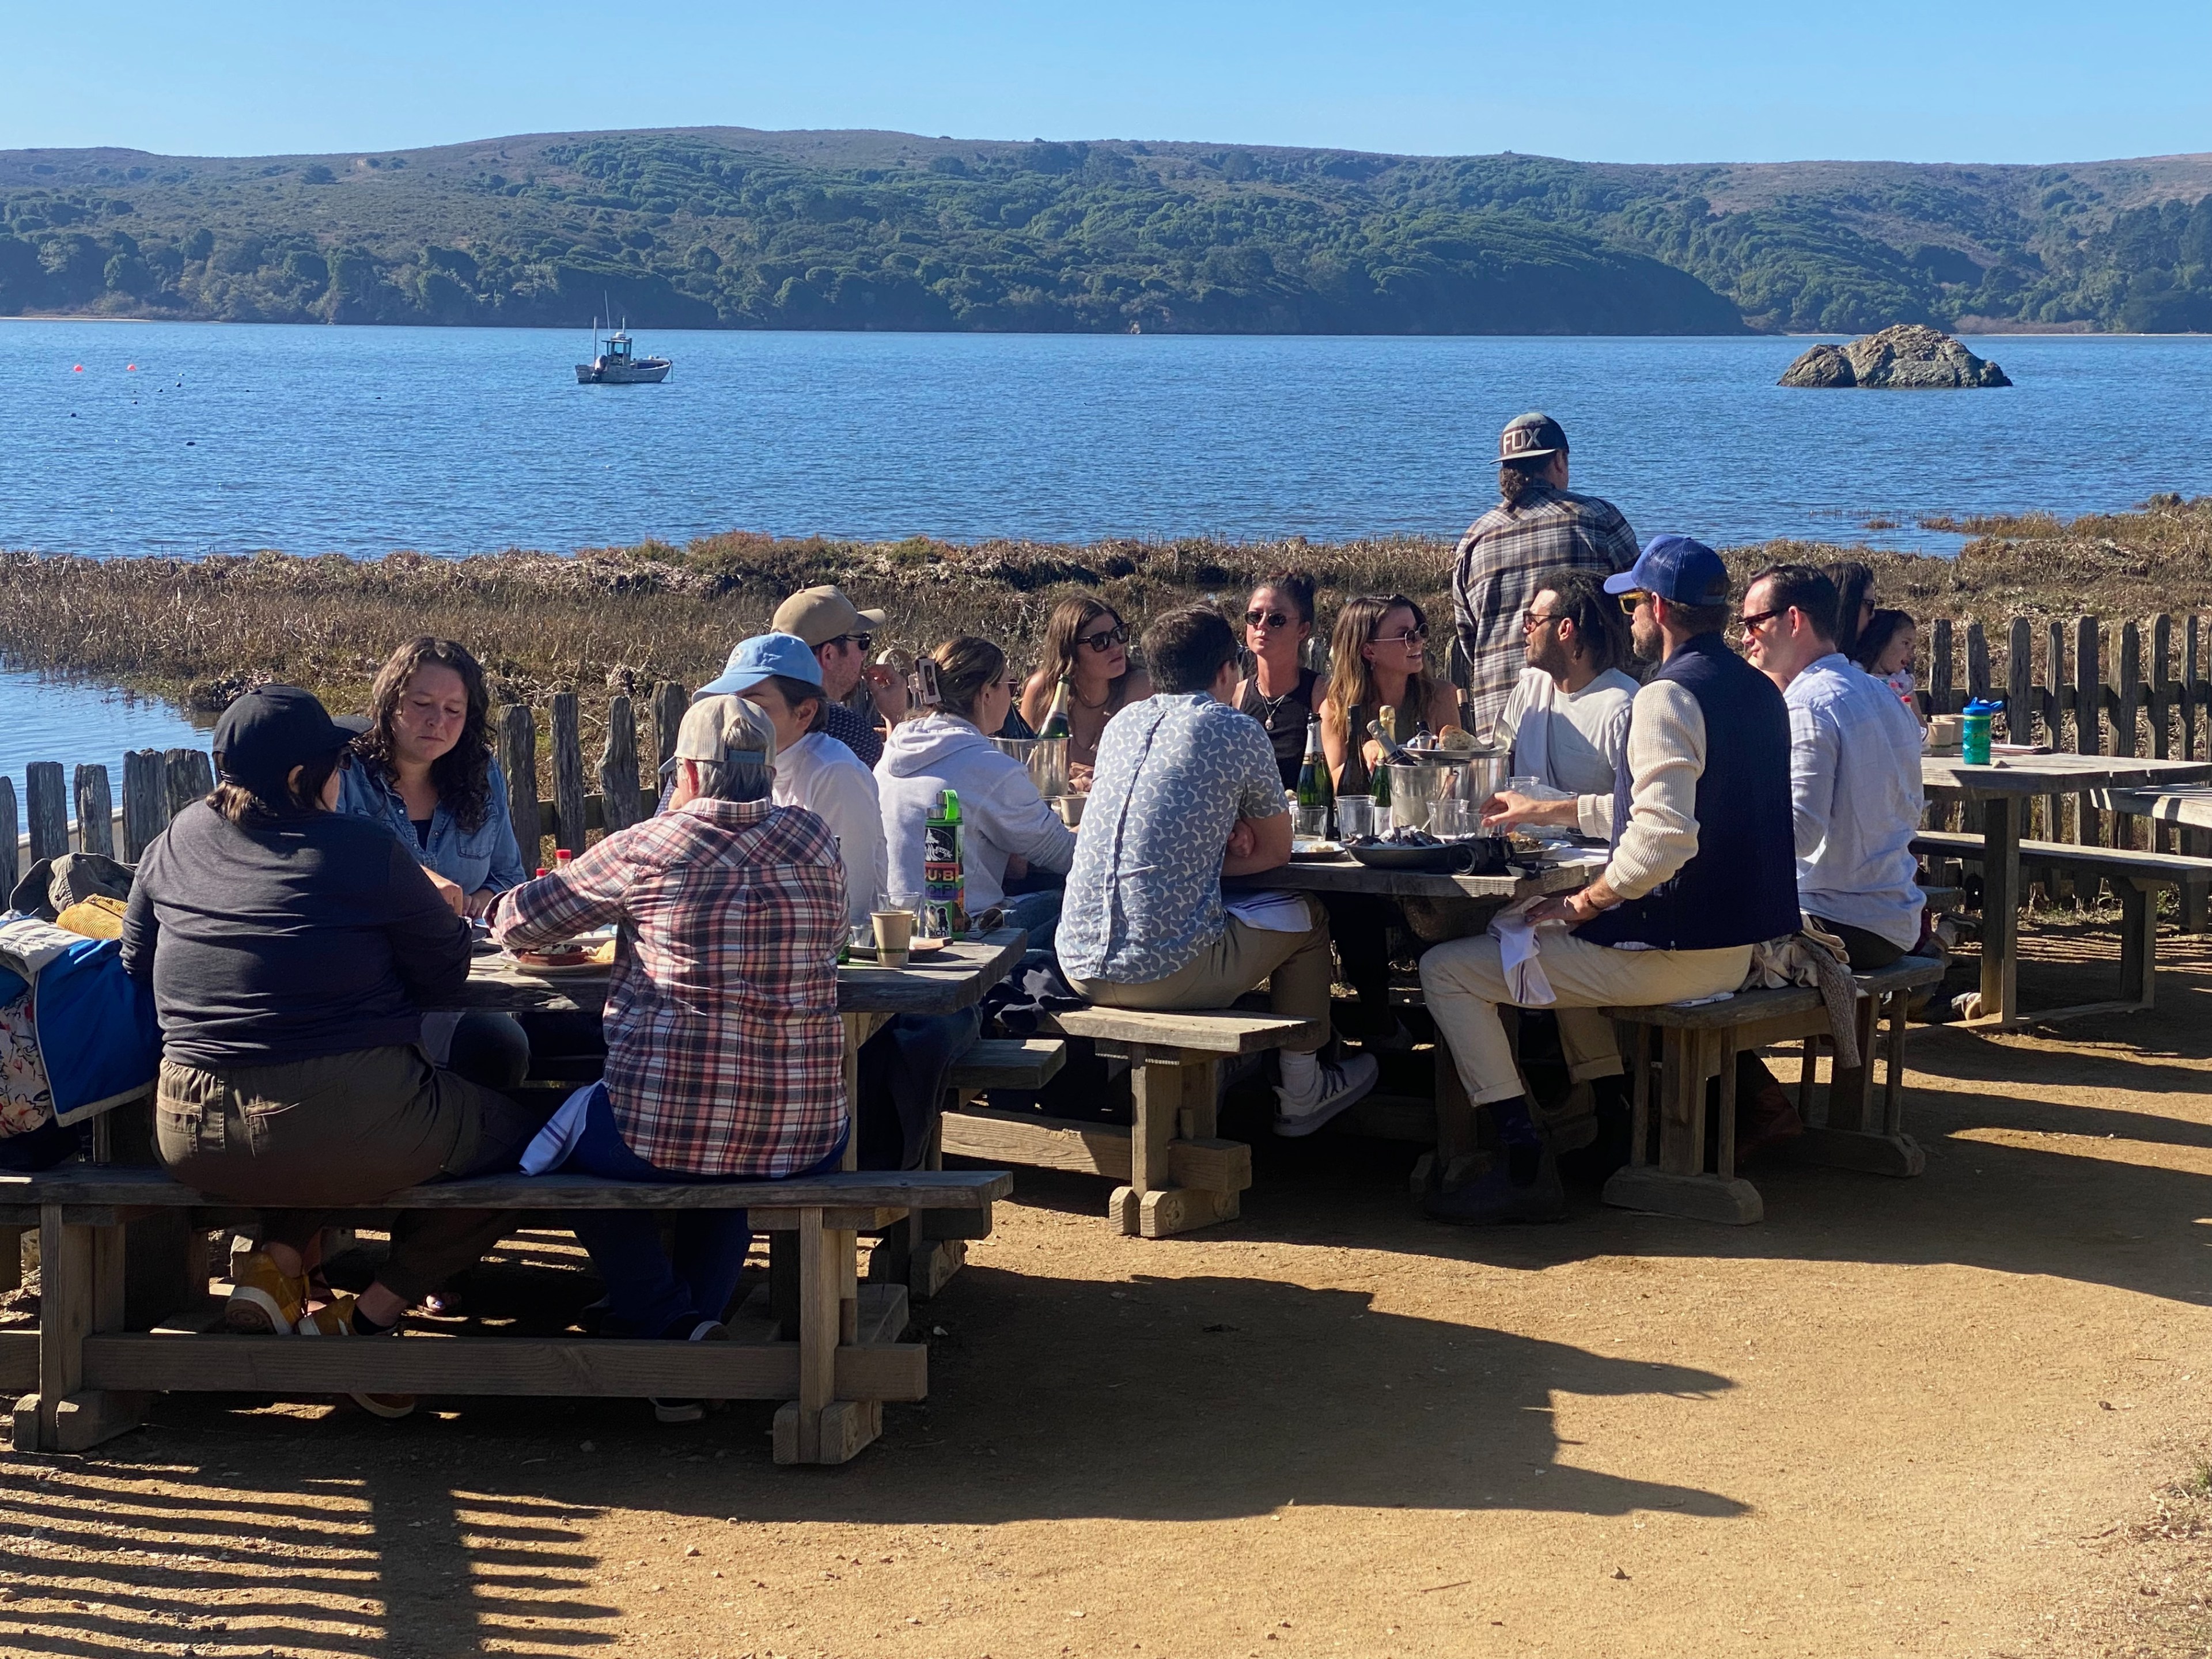 People gather eating oysters at picnic tables next to the sea.